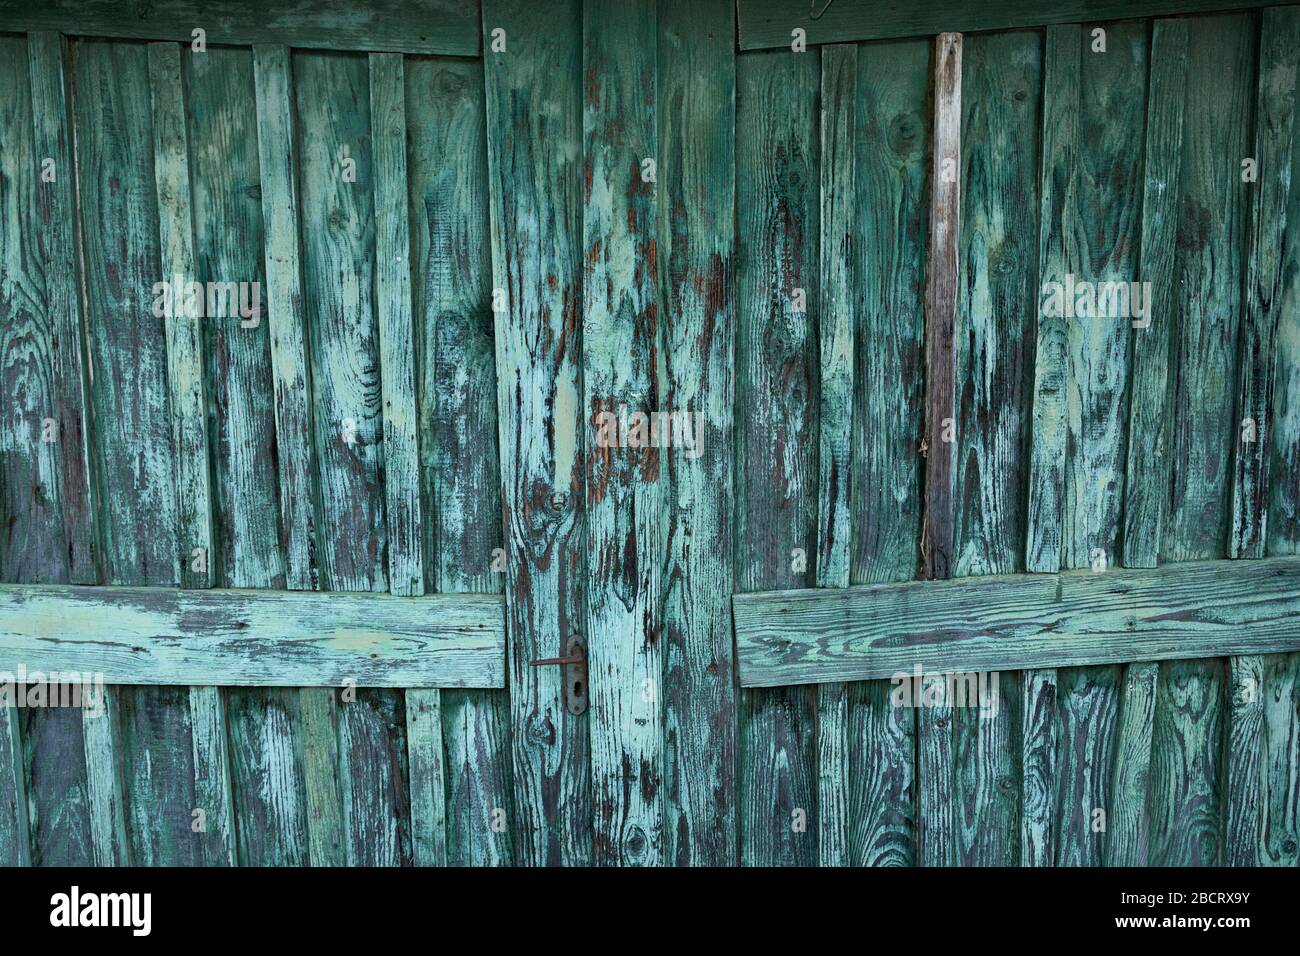 green painted old wooden door surface, wood texture ready for your design Stock Photo